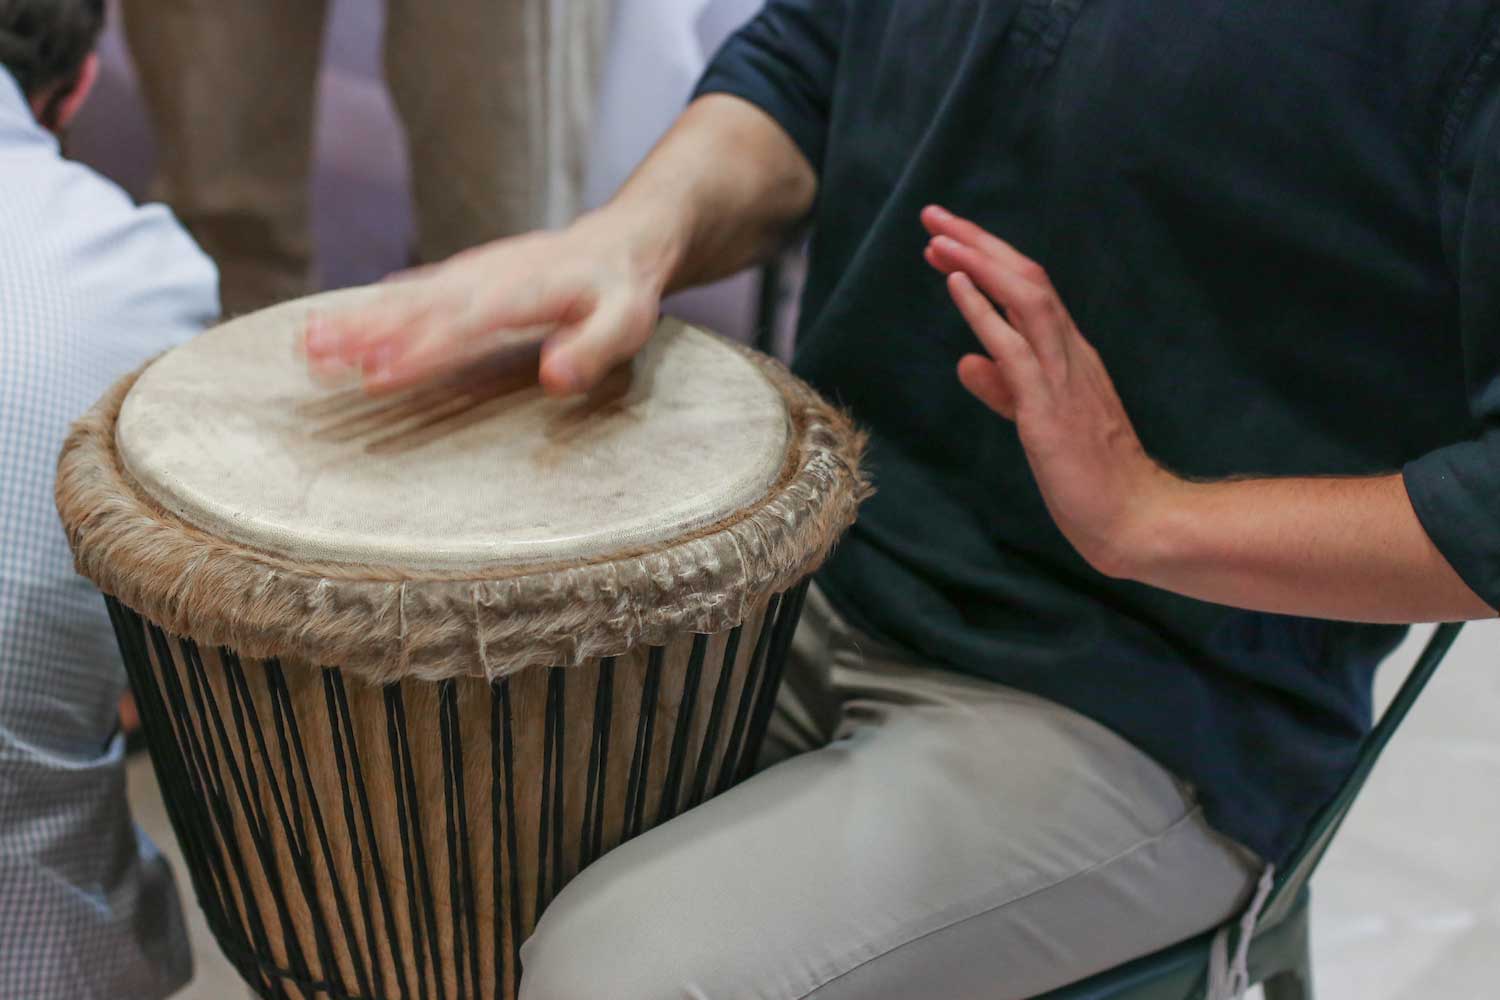 A person beating a drum with their hands.